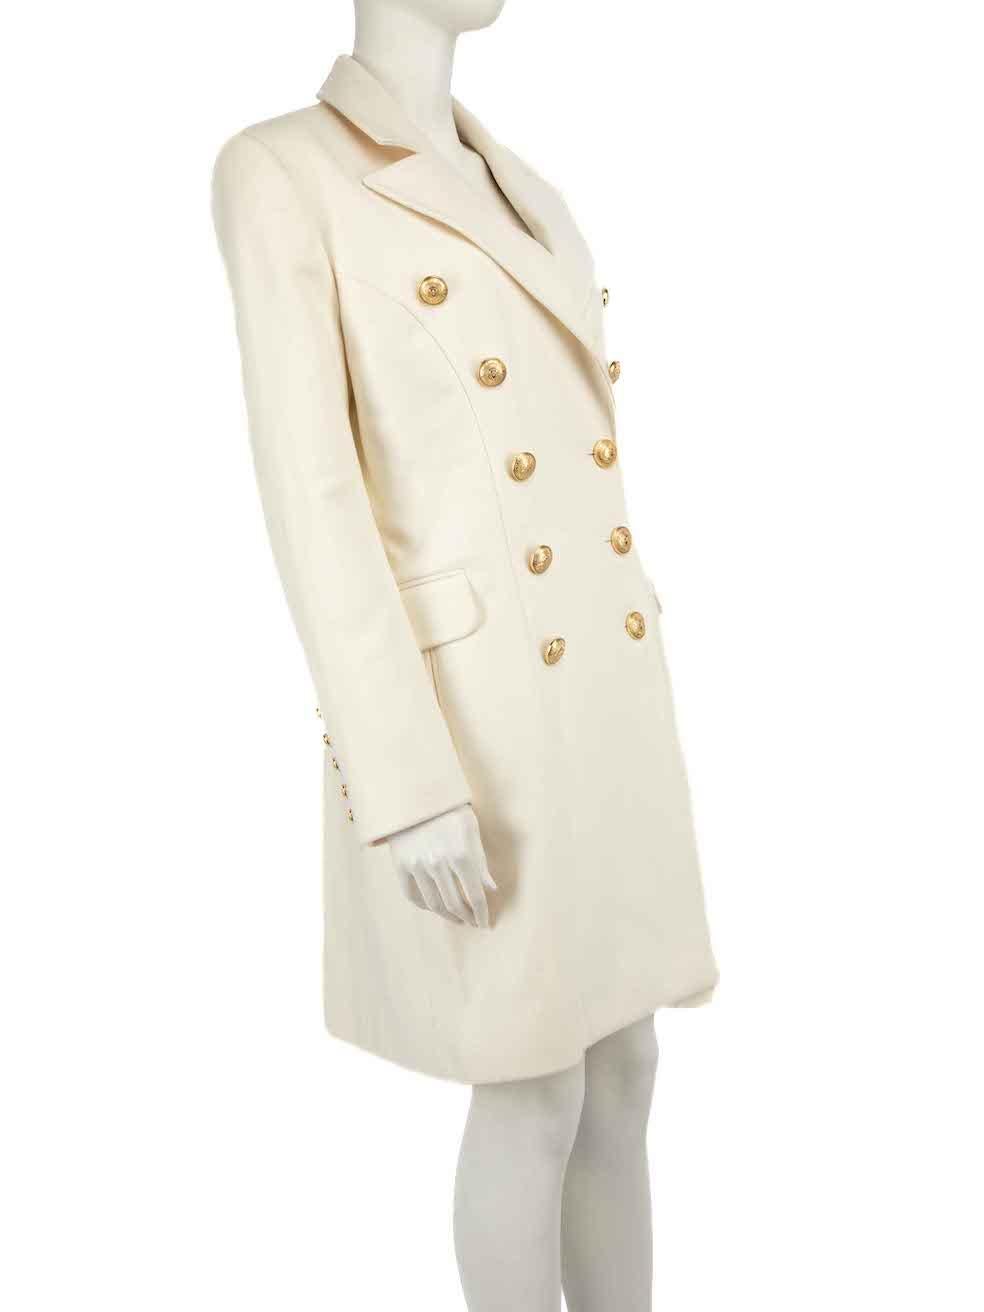 CONDITION is Never worn, with tags. No visible wear to coat is evident on this new Balmain designer resale item.
 
Details
Cream
Wool
Mid length coat
Double breasted with logo buttons
Buttoned cuffs
2x Front side pockets with flaps

Made in Poland
